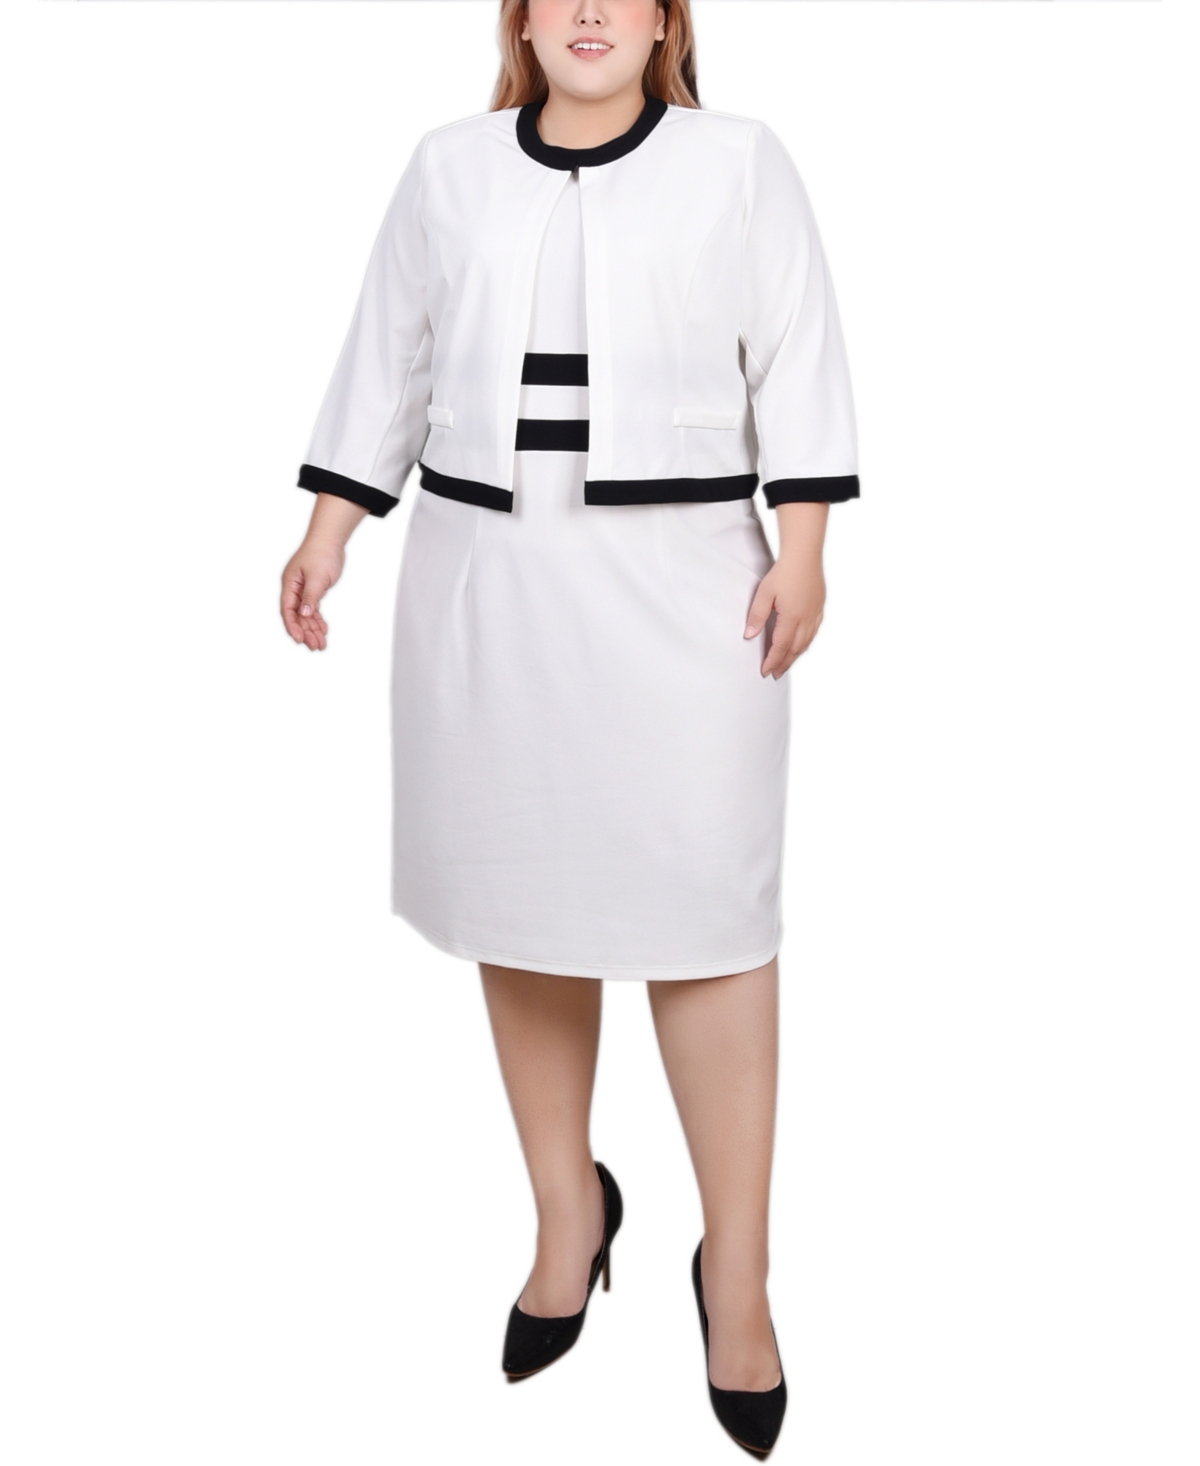 NY COLLECTION PLUS SIZE ELBOW SLEEVE COLORBLOCKED DRESS, 2 PIECE SET